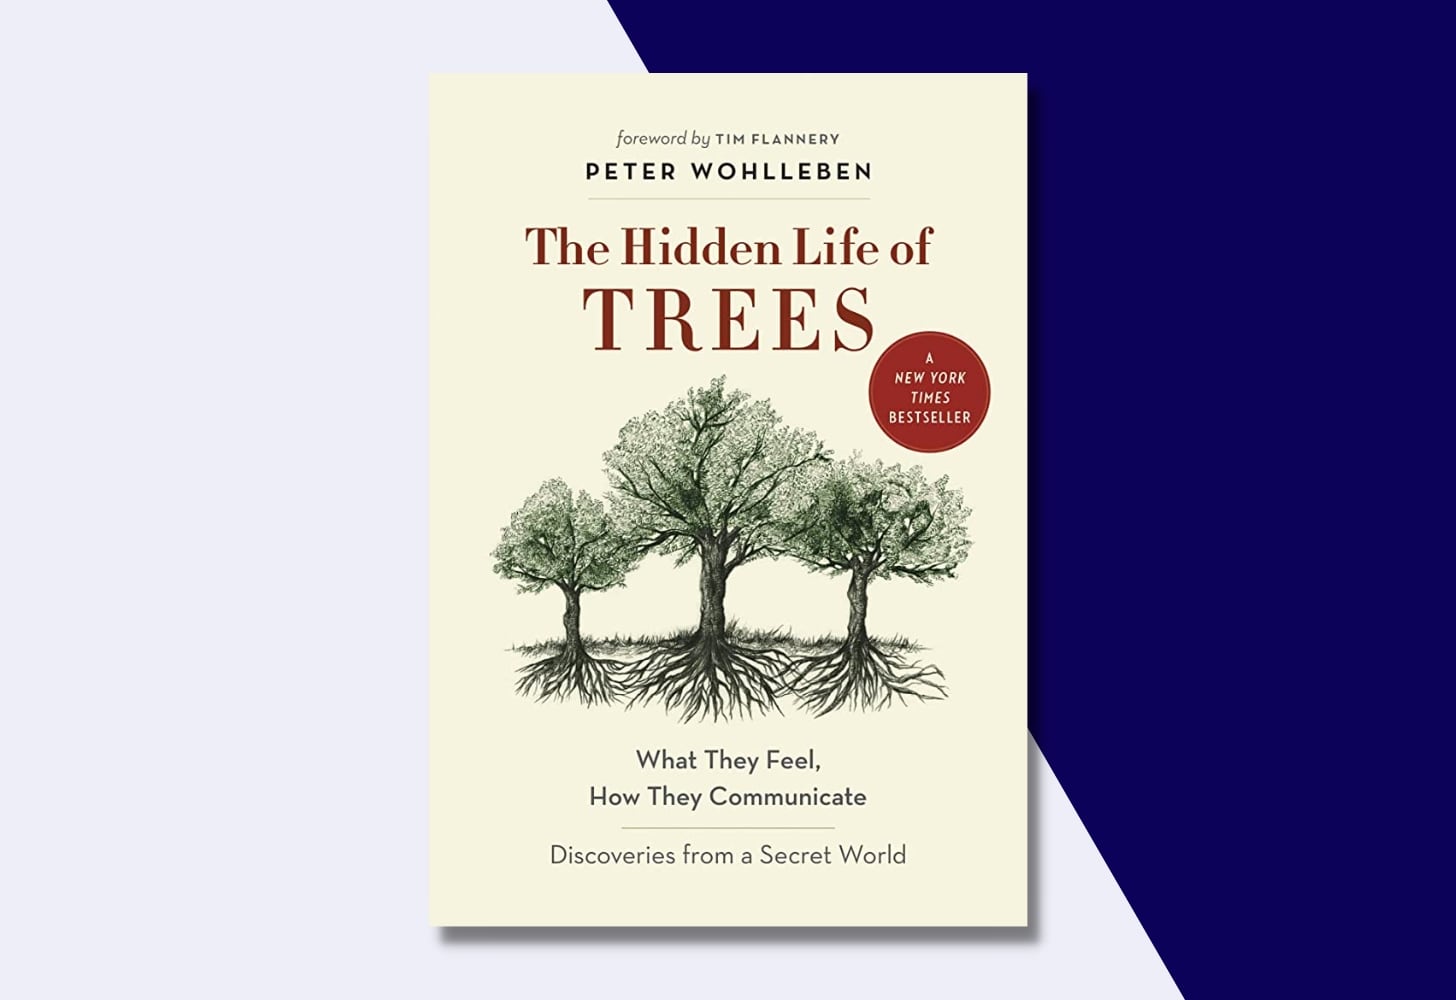 “The Hidden Life of Trees” by Tim Flannery